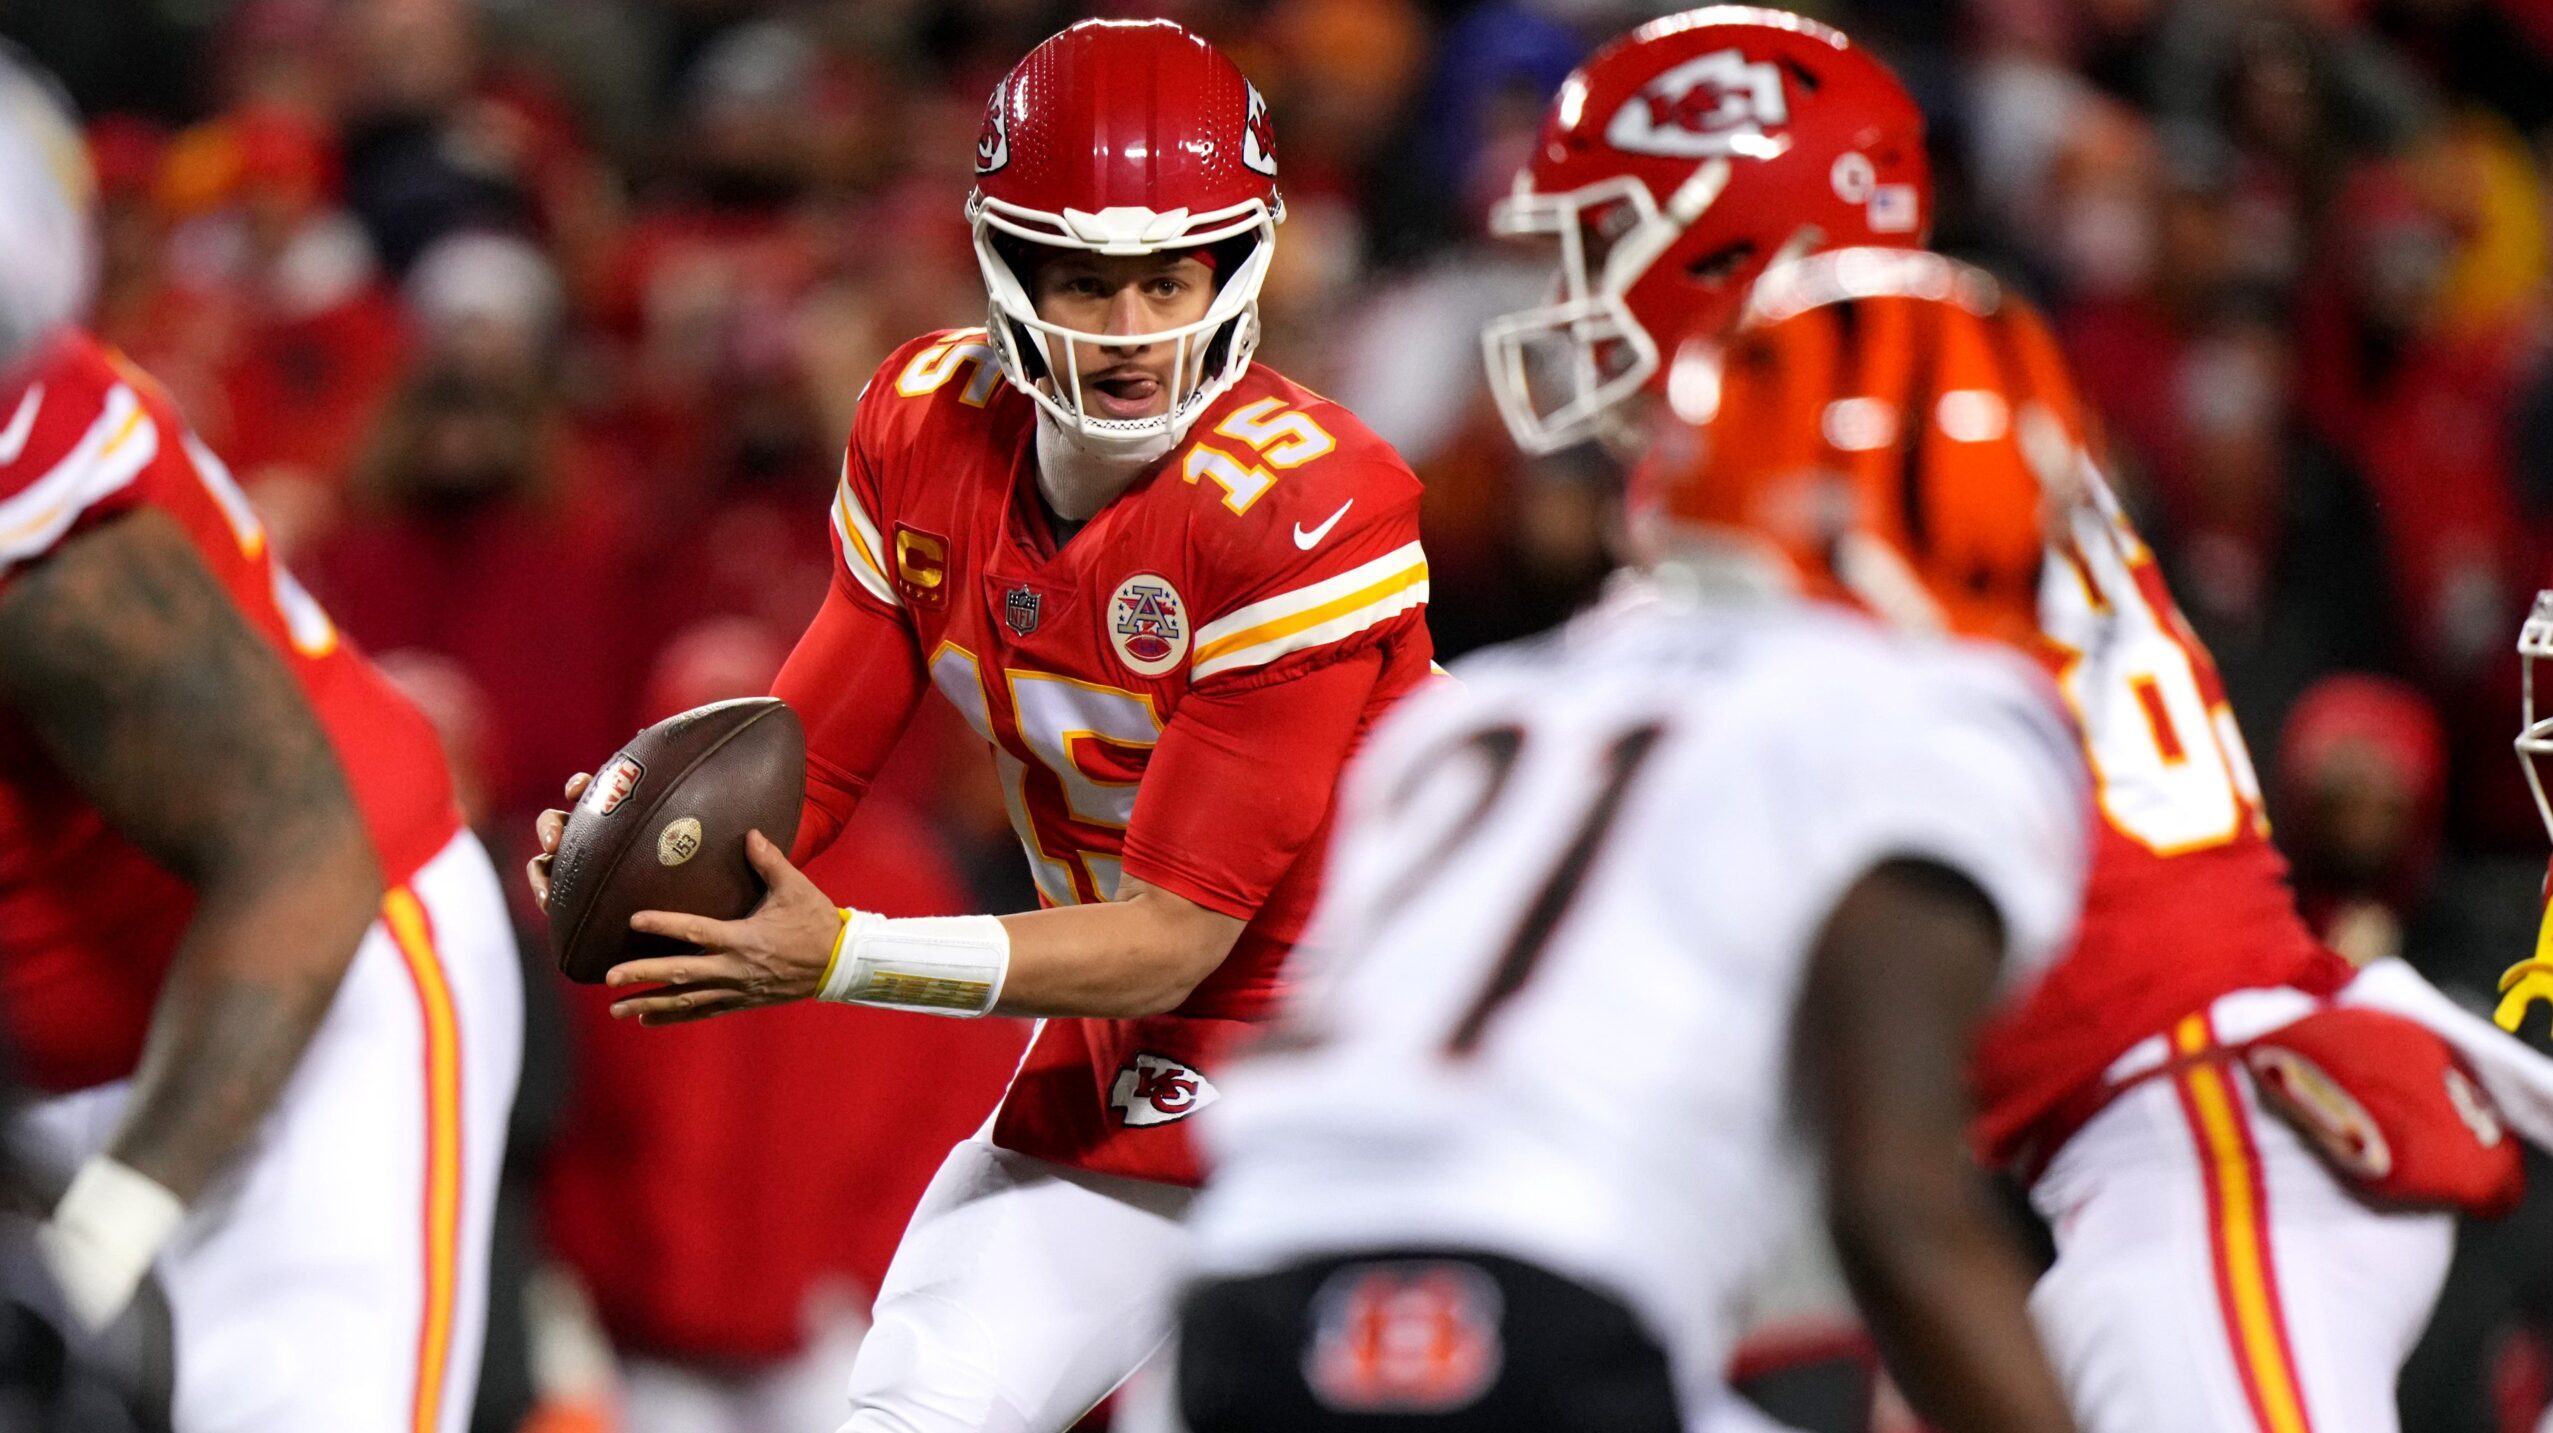 Mahomes Showed He Was Tough, ‘Resourceful’ against Bengals